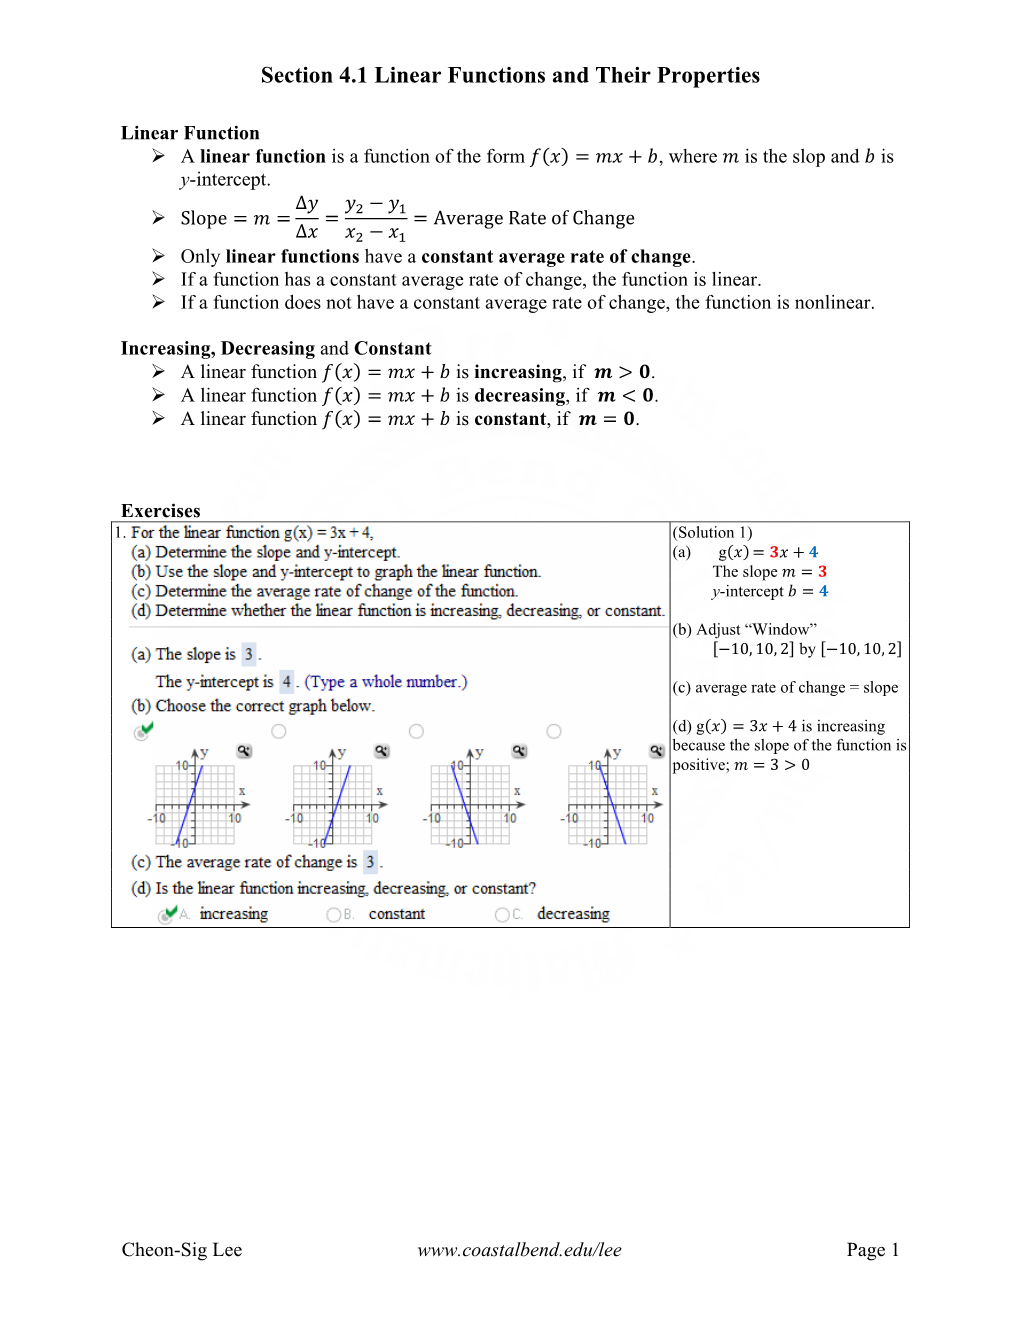 Section 4.1 Linear Functions and Their Properties